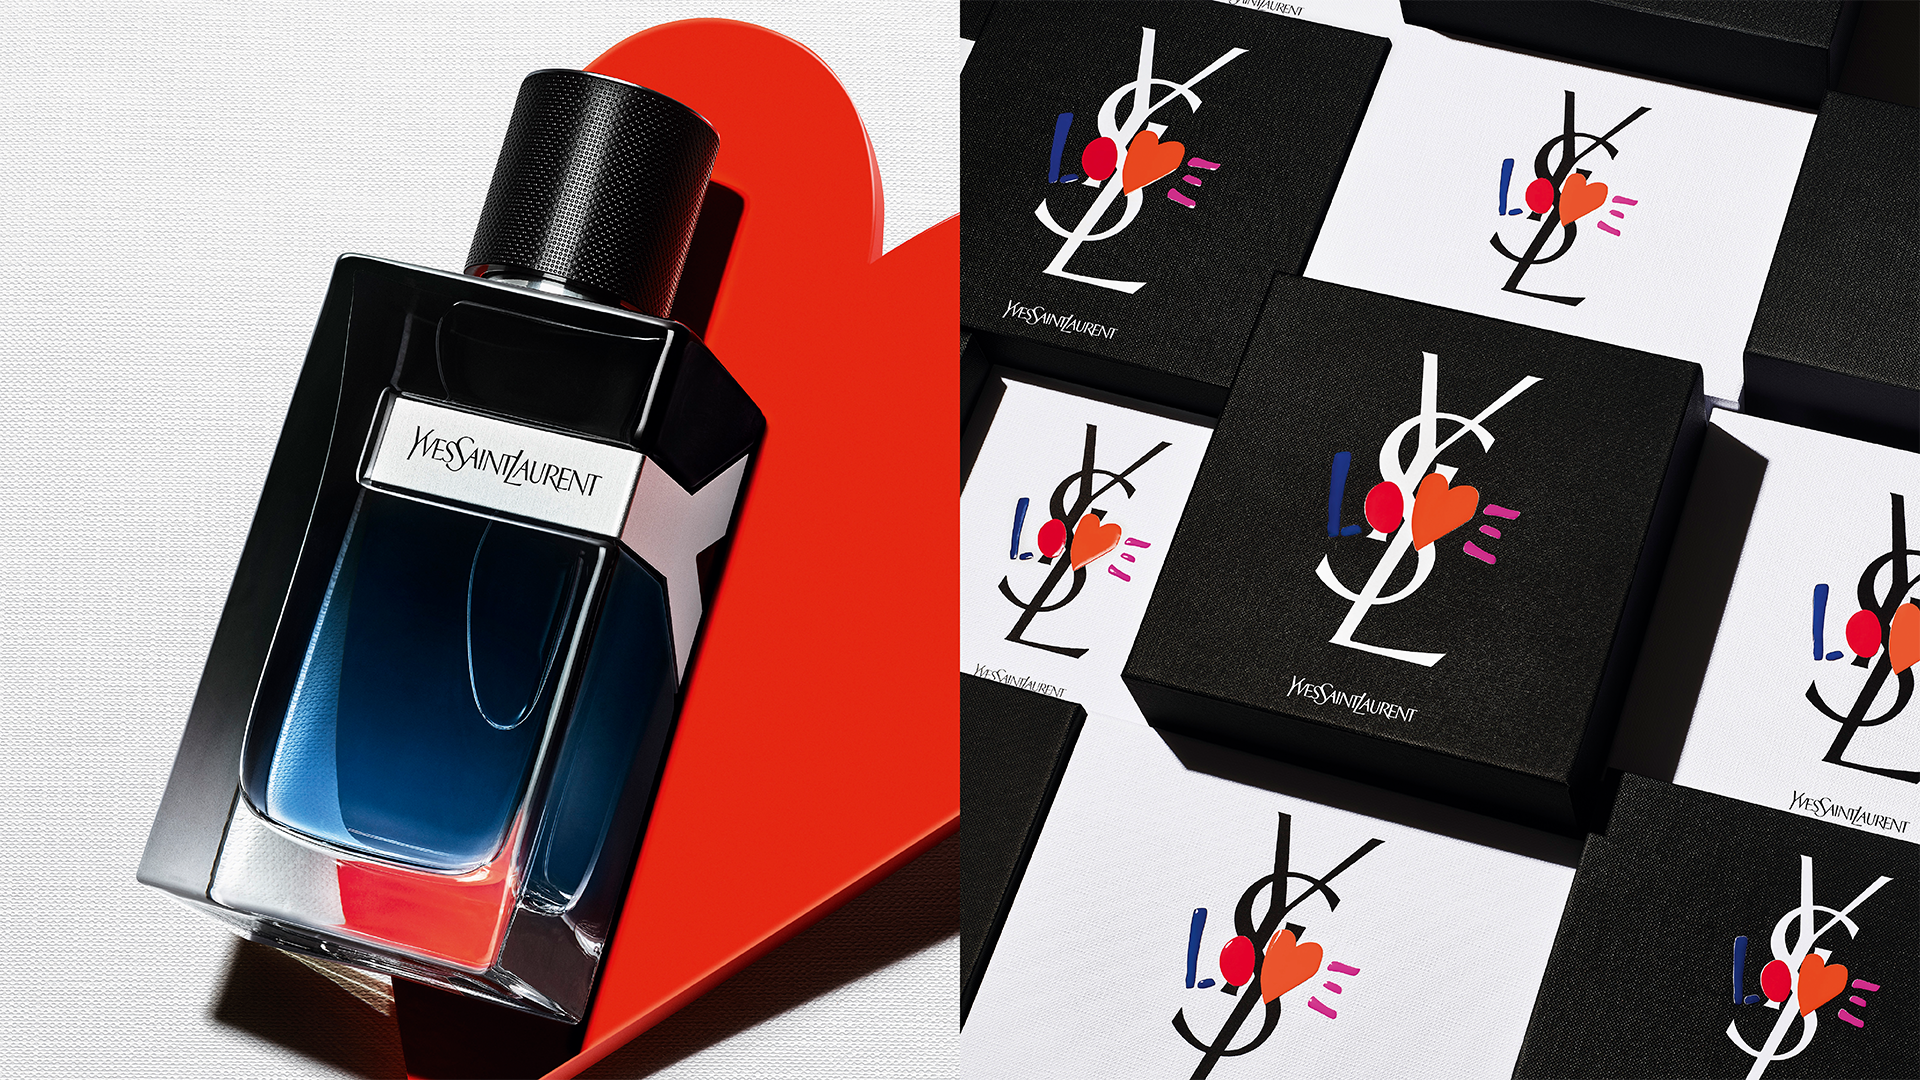 Photography of Y perfume from Yves Saint Laurent brand with the wrapping/ box of father's day animation - Love, heart, YSL